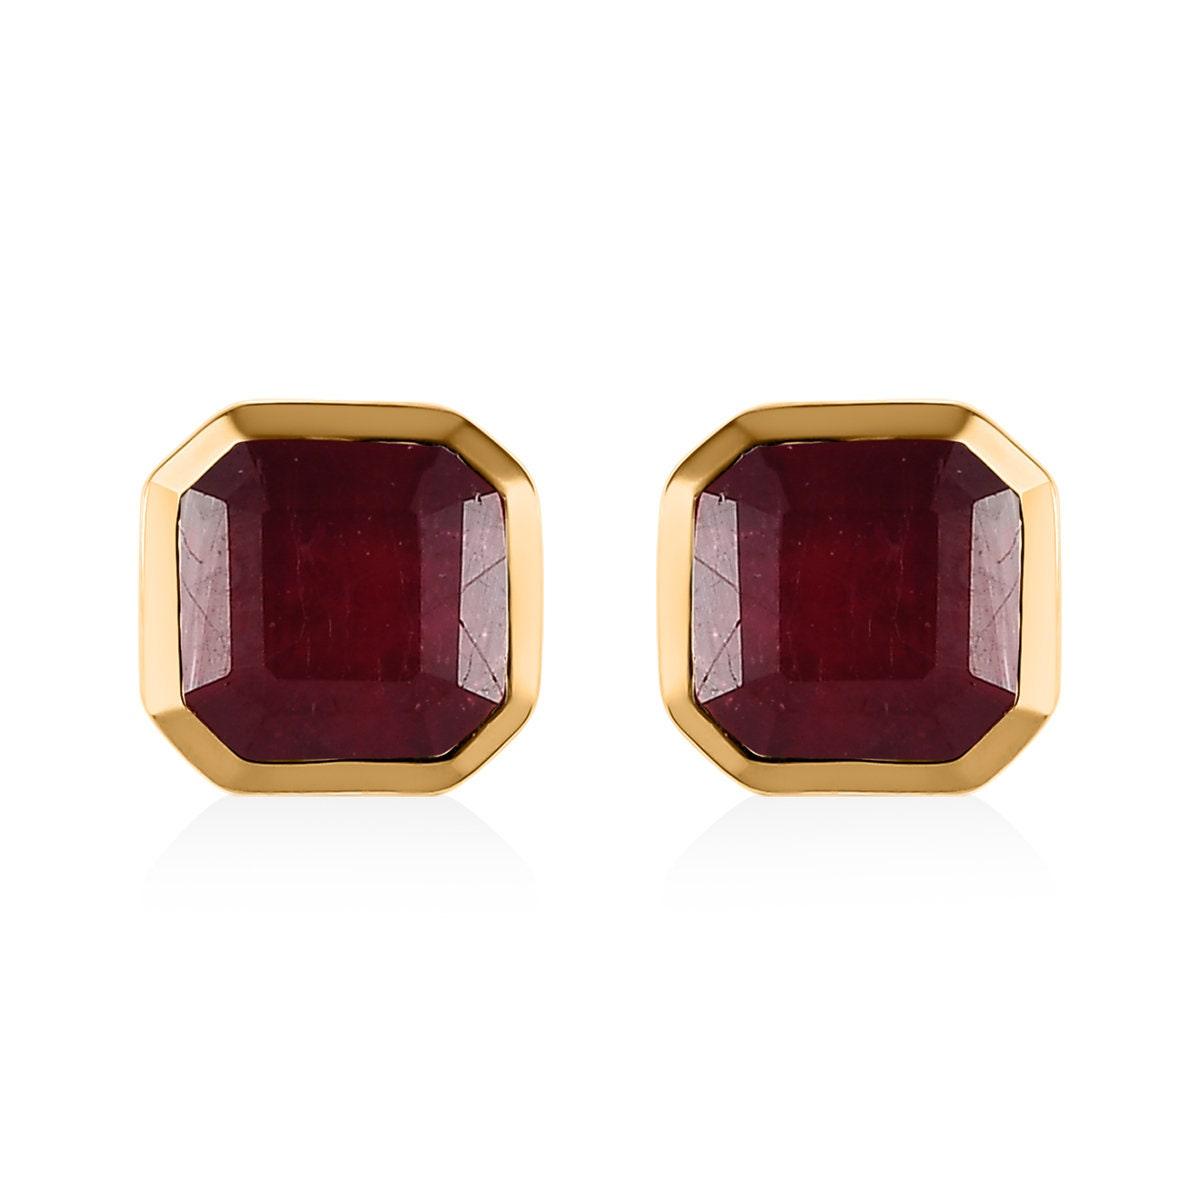 Natural Ruby Studs, Cushion Gemstone earrings, 925 Sterling Silver Stud, Yellow Gold, July Birthstone By Inspiring Jewellery - Inspiring Jewellery